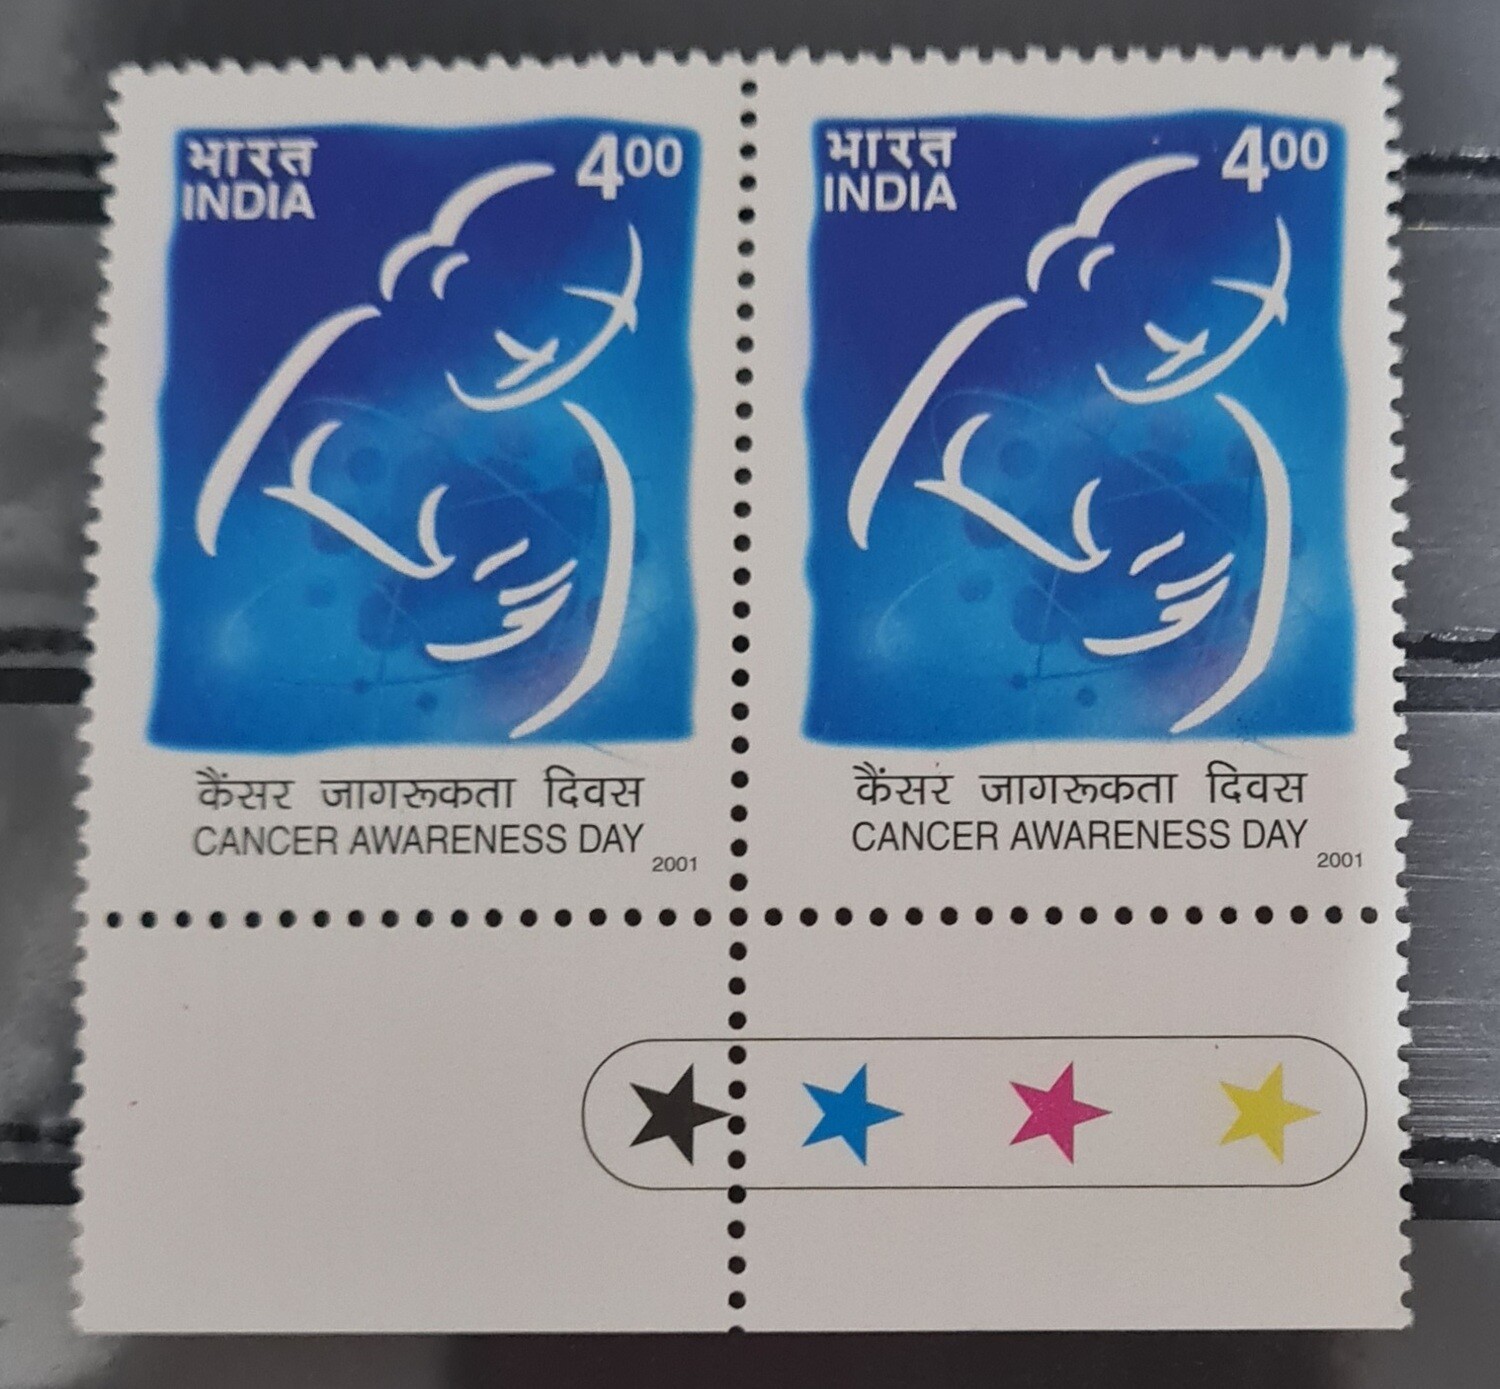 INDIA-CANCER AWARNESS DAY 2001 MNH pair of stamps with traffic lights